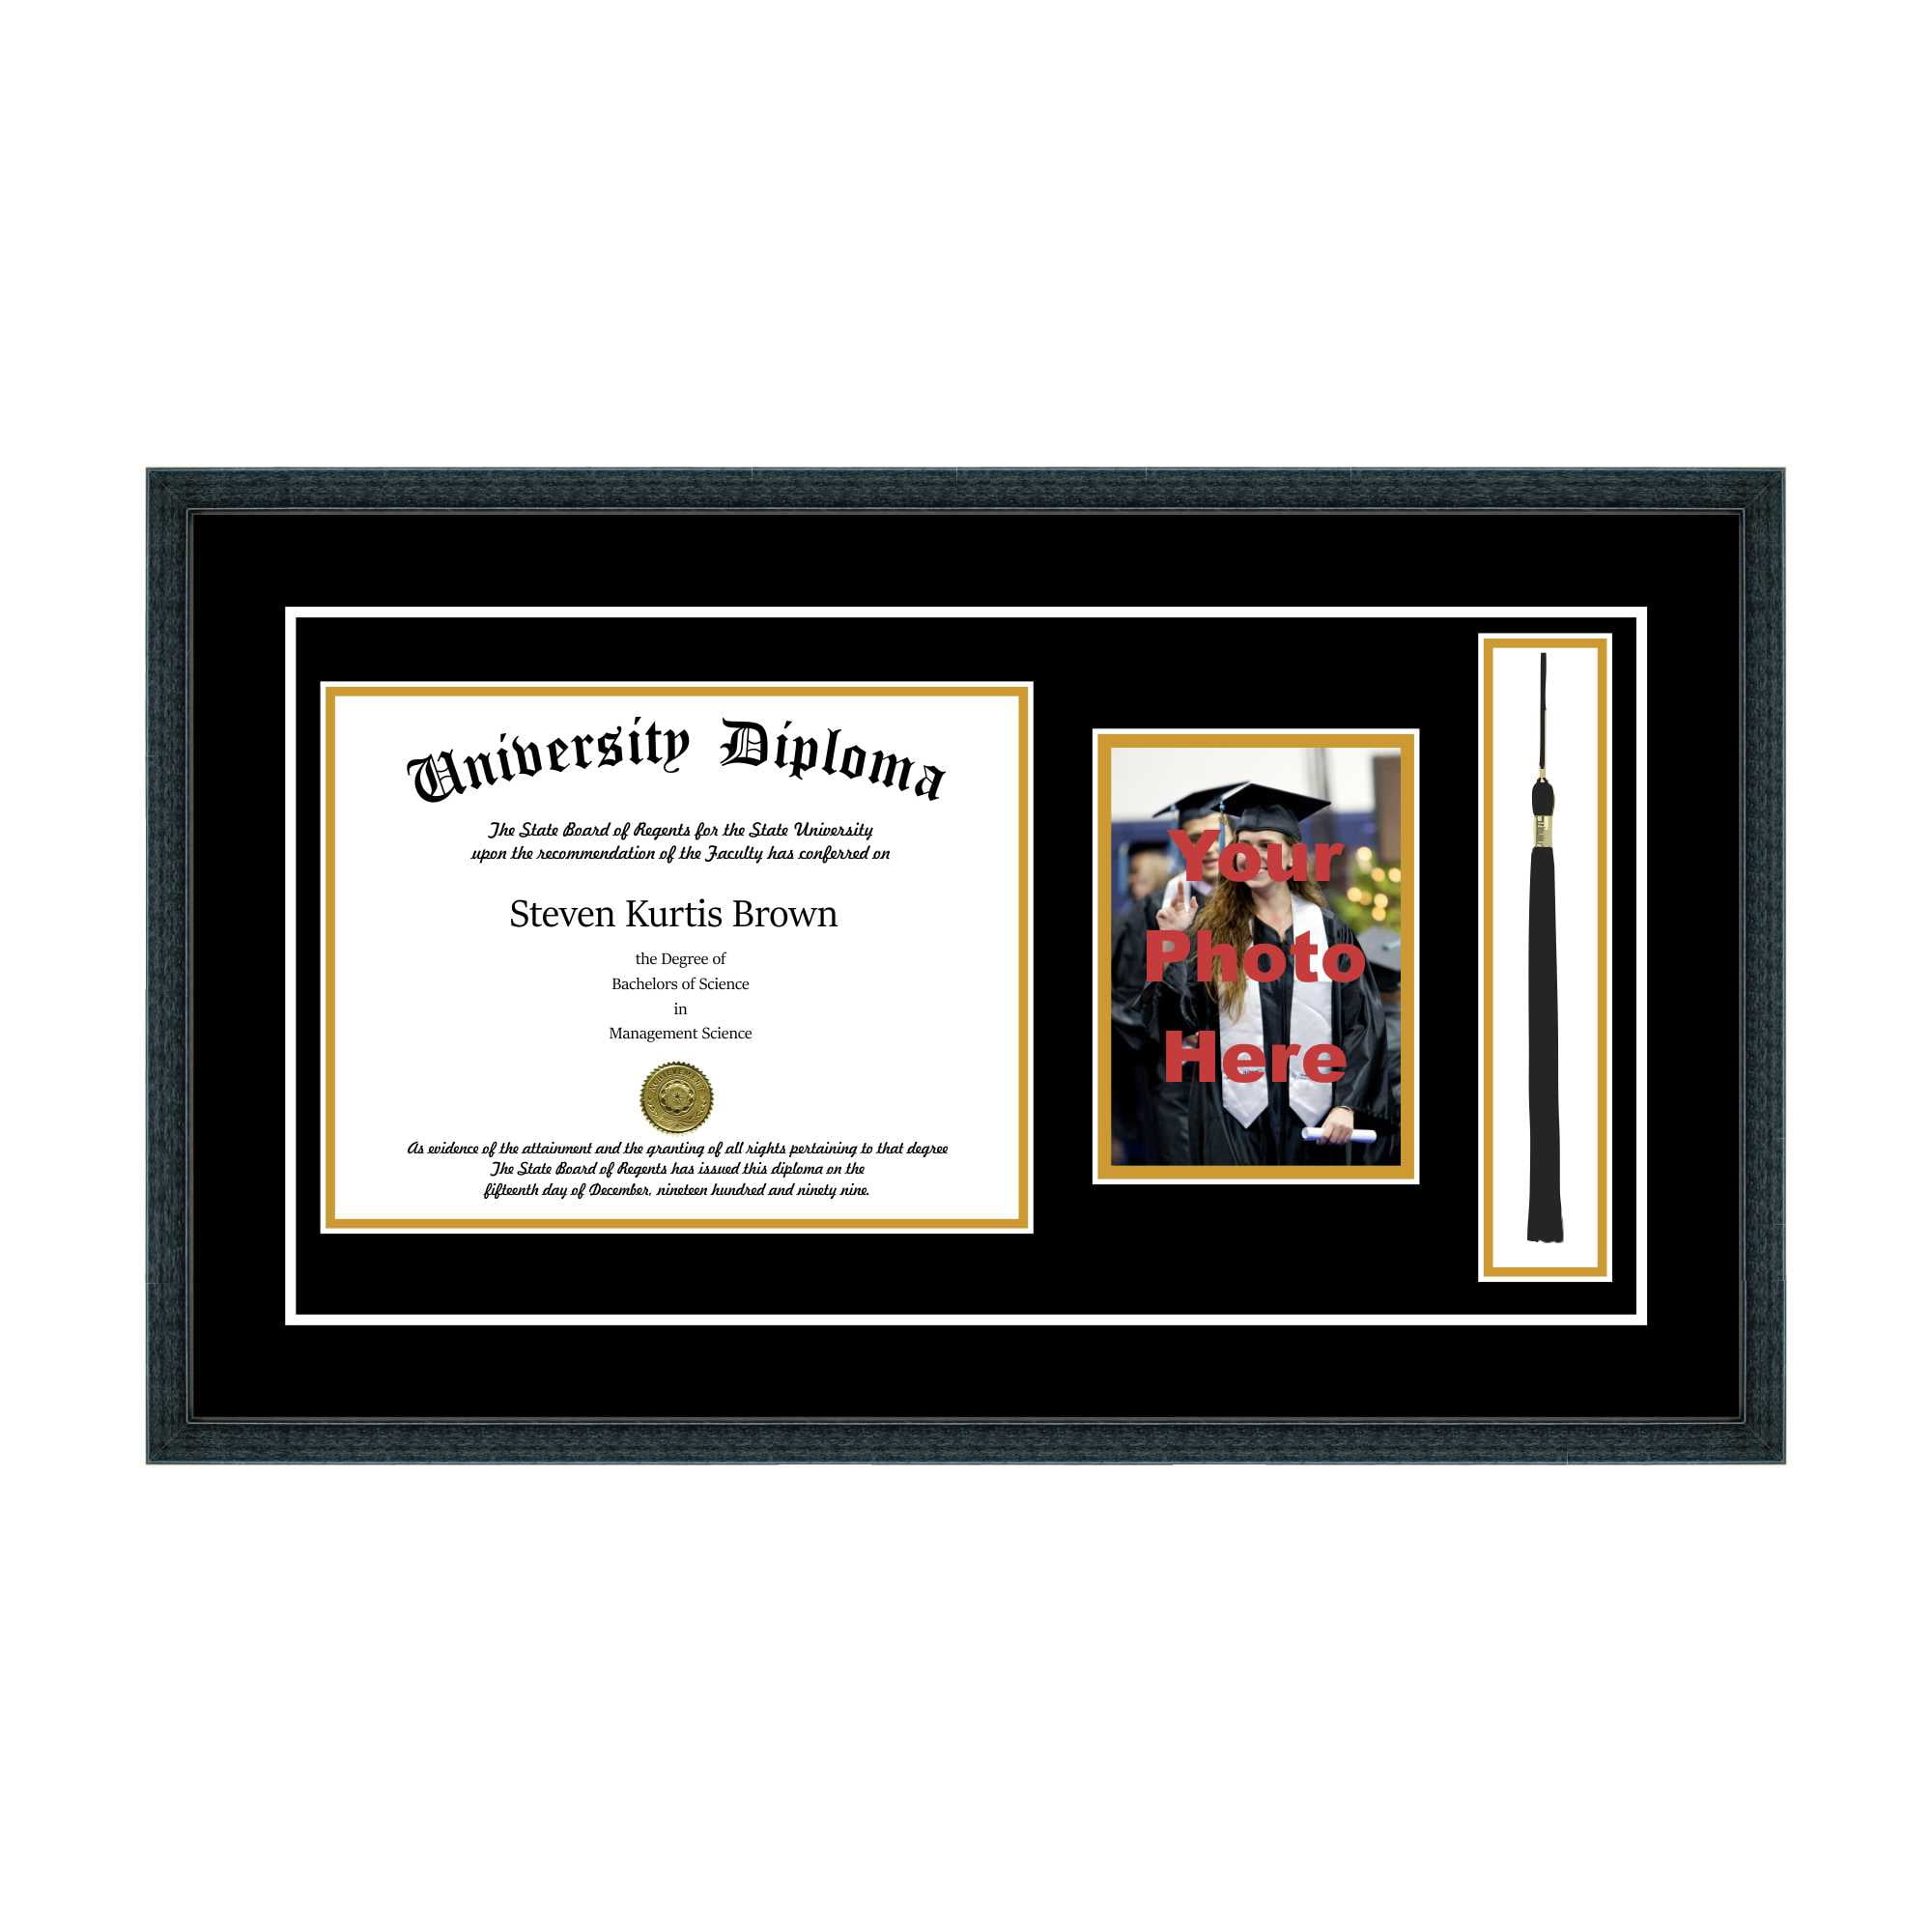 DOUBLE DIPLOMA TASSEL  FRAME  MAHOGANY 8" Wide by 6" High 